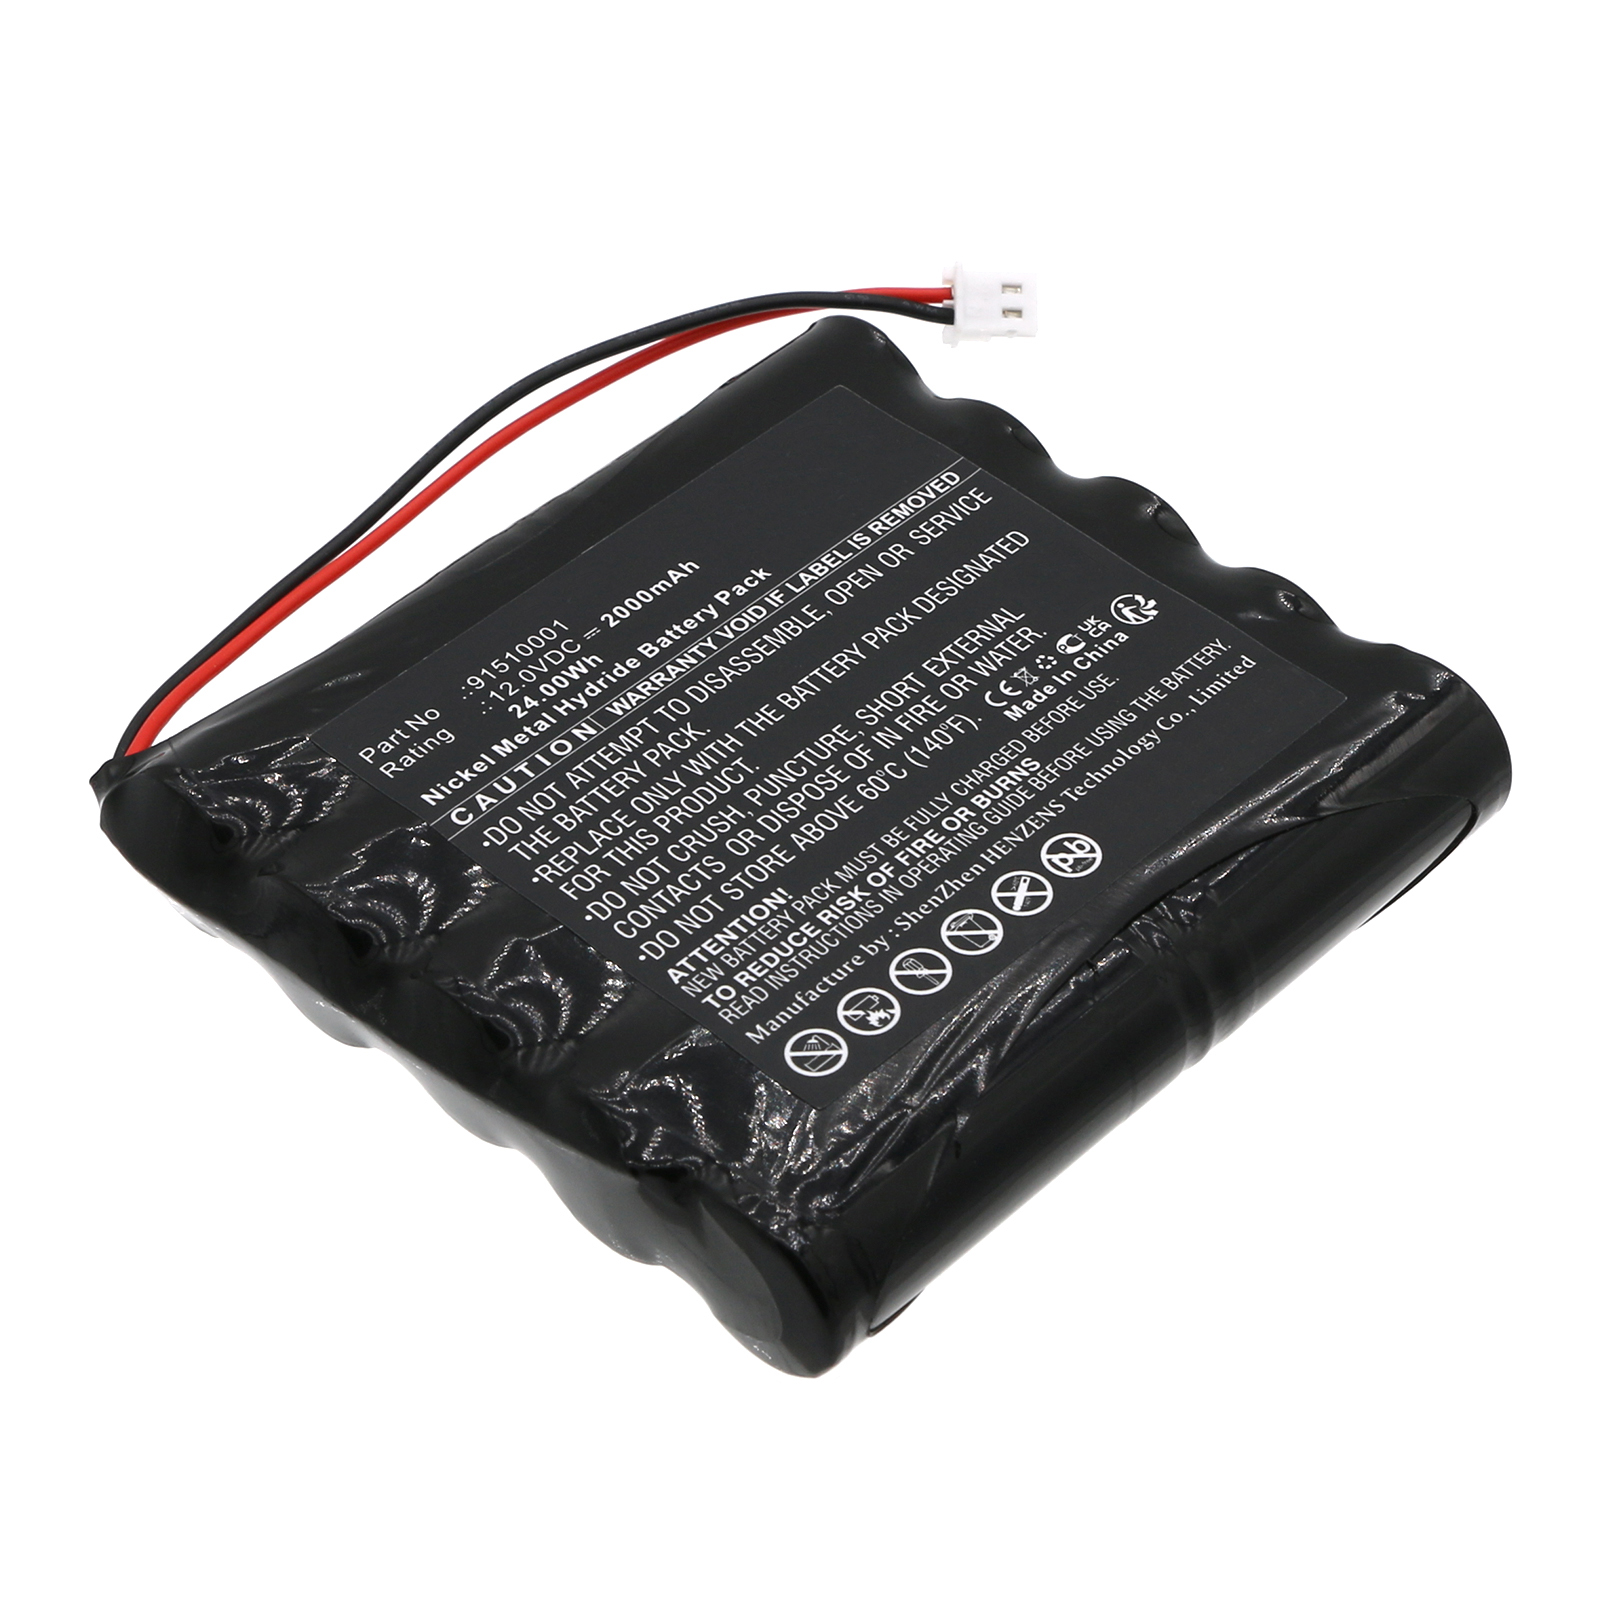 Synergy Digital Equipment Battery, Compatible with Bora 91510001 Equipment Battery (Ni-MH, 12V, 2000mAh)